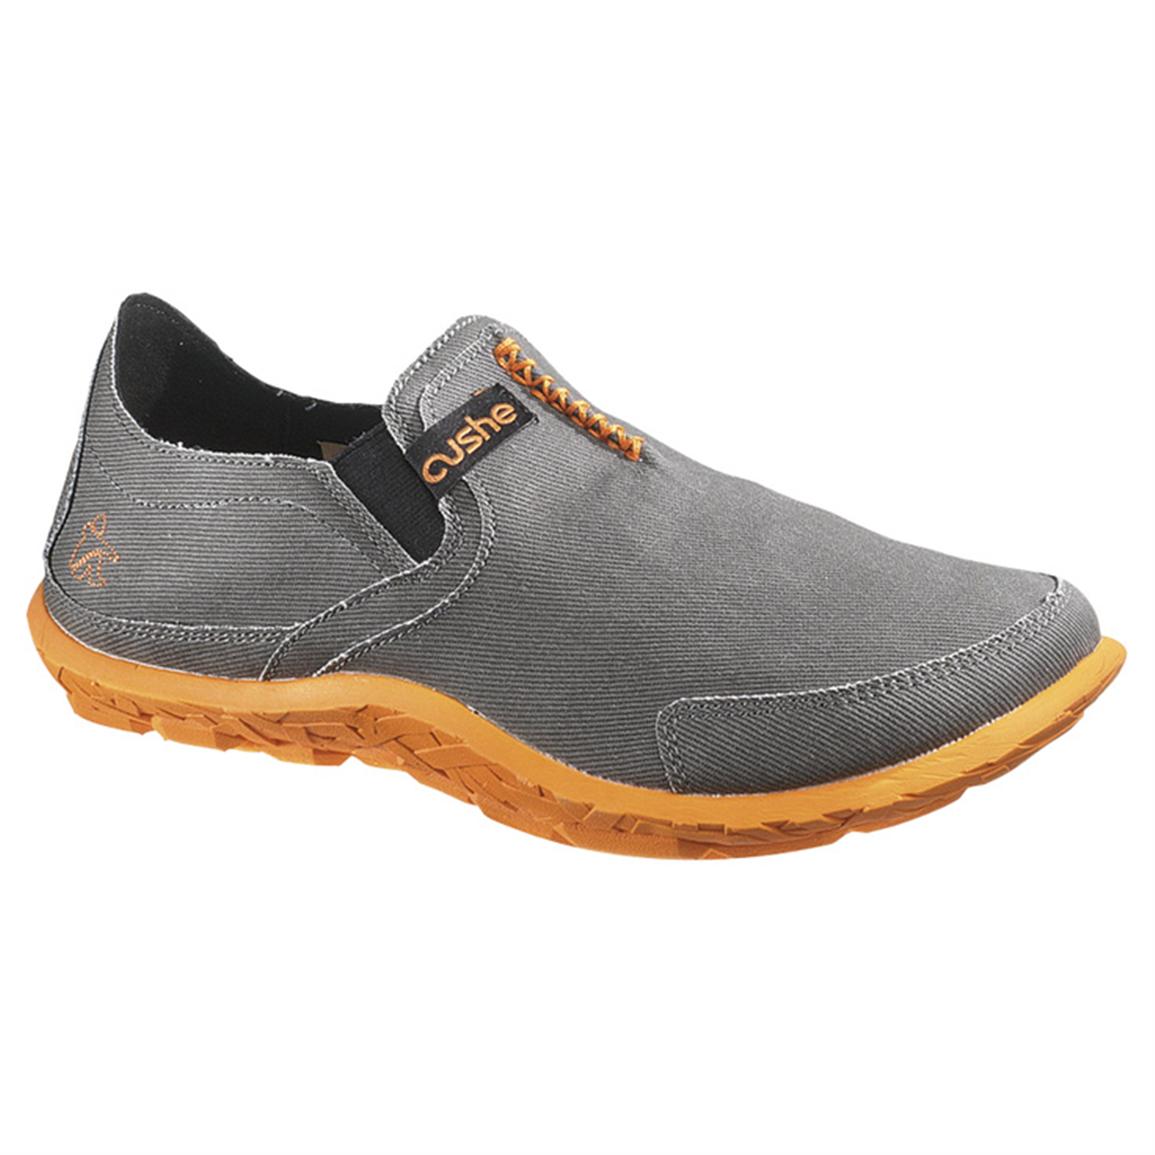 Men's Cushe® Slipper Canvas Shoes - 583466, Casual Shoes at Sportsman's ...